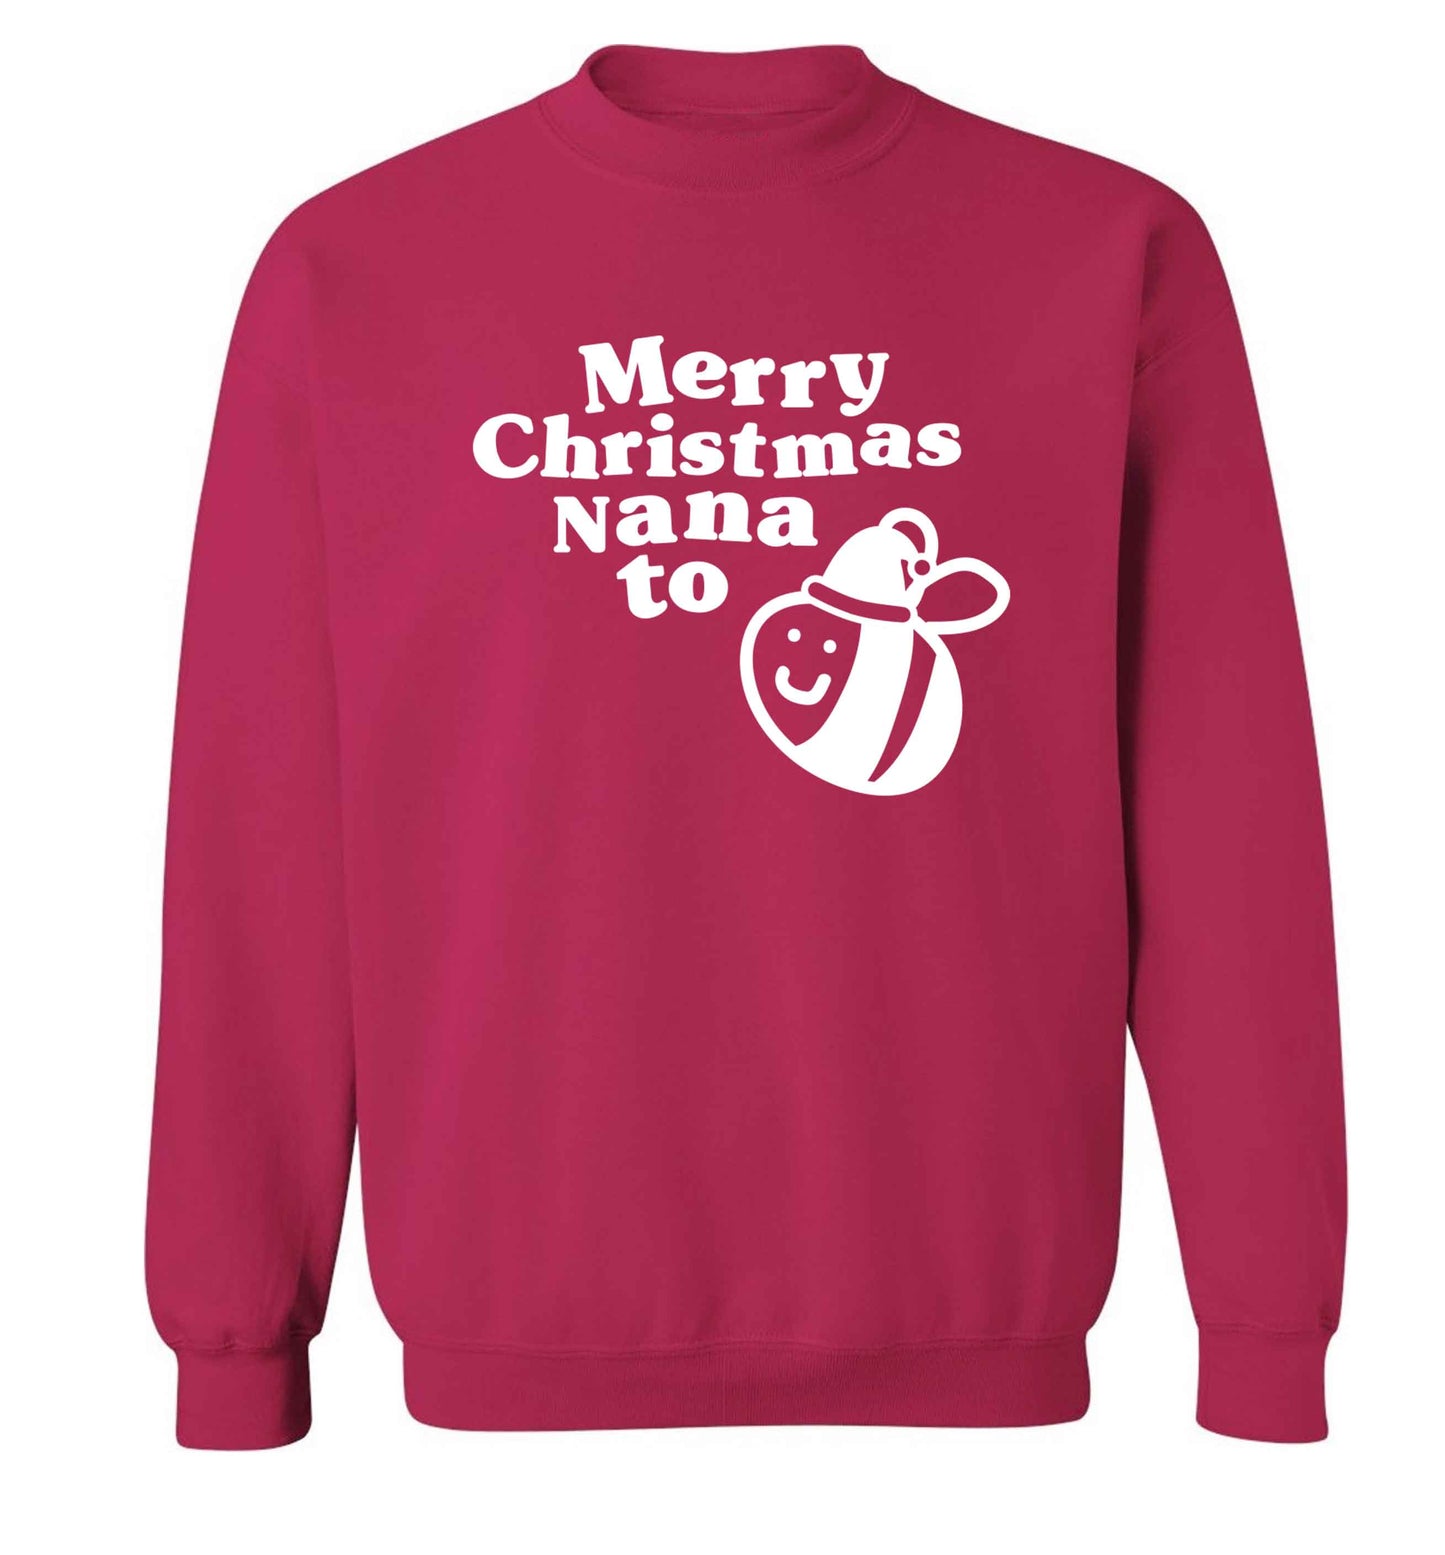 Merry Christmas nana to be Adult's unisex pink Sweater 2XL